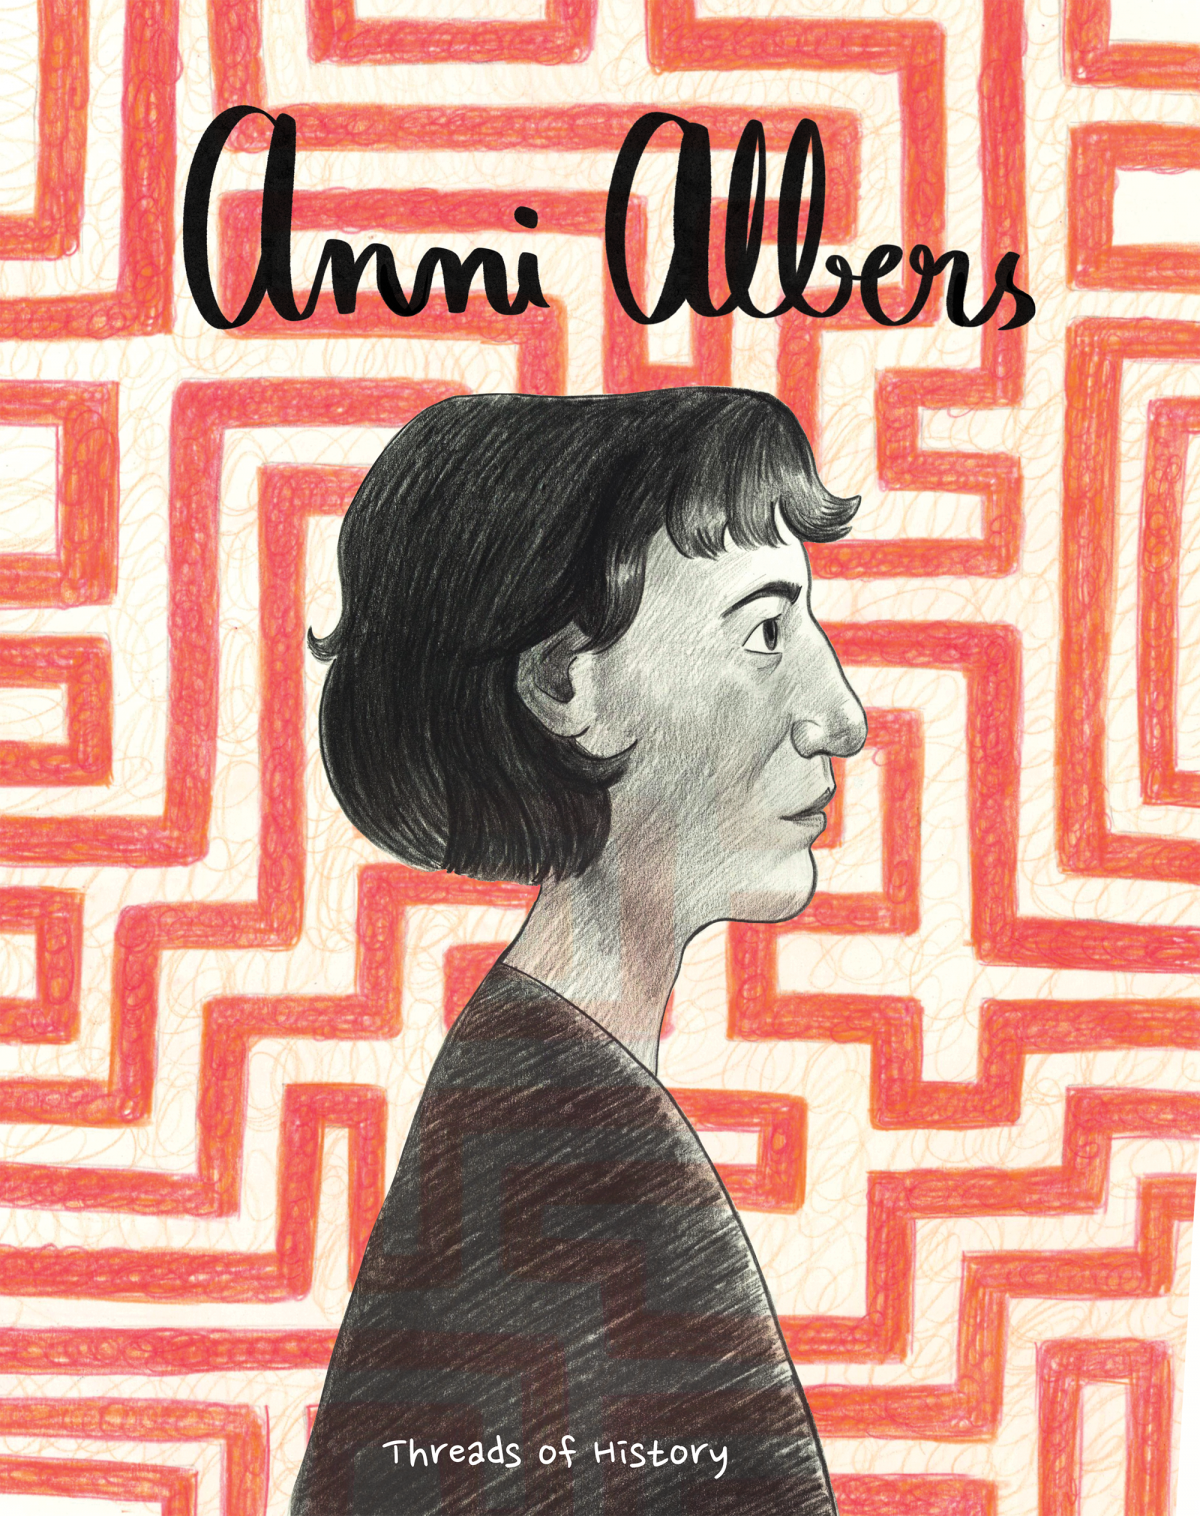 The cover "Threads of History: A Comic About Anni Albers." A woman drawn in profile stands against a background or red on white maze-like design.